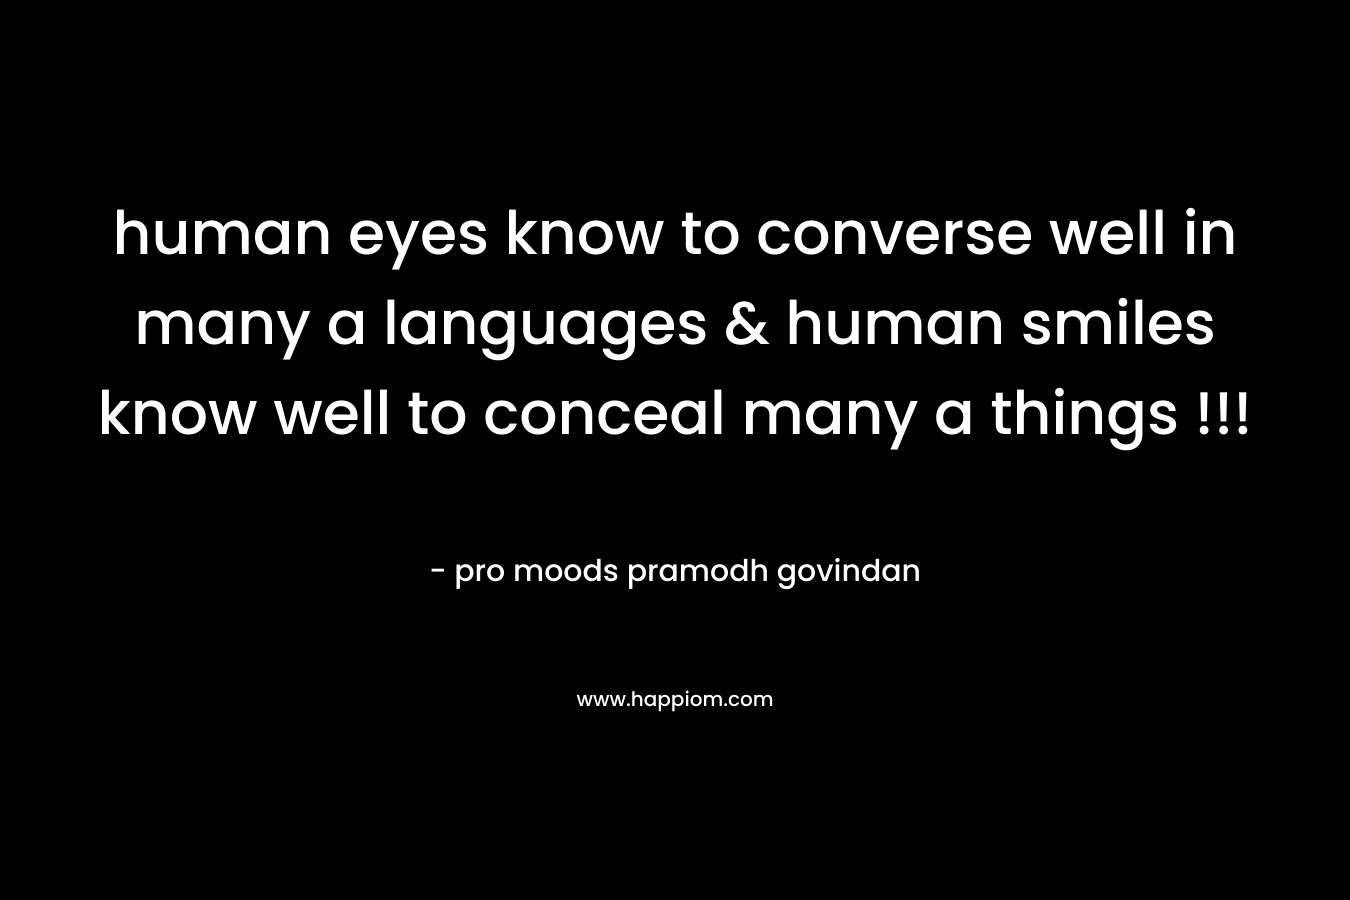 human eyes know to converse well in many a languages & human smiles know well to conceal many a things !!!